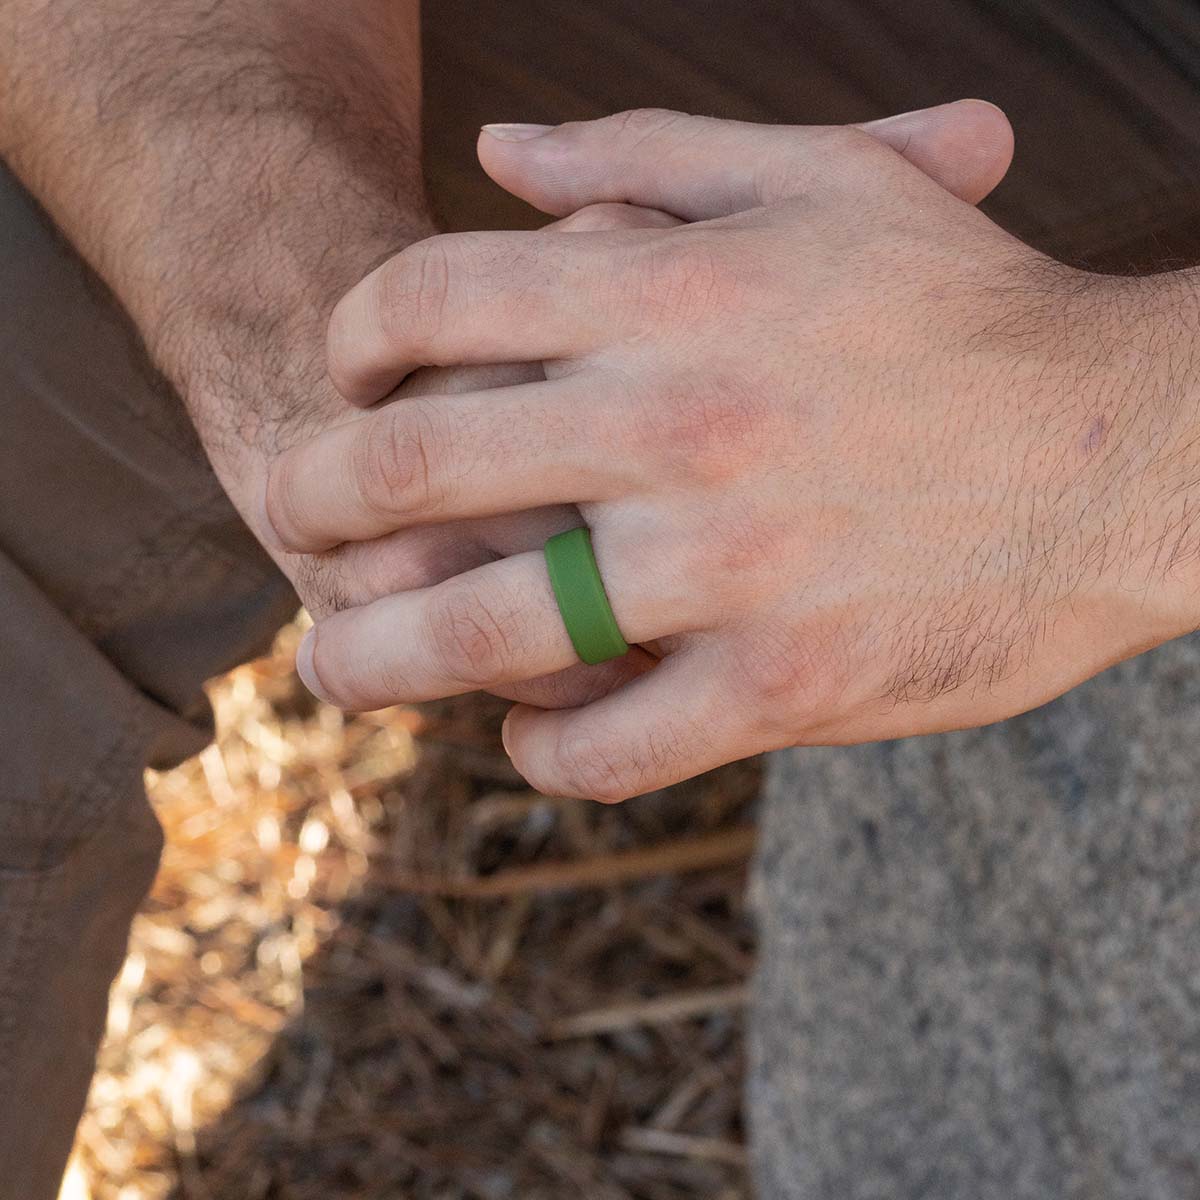 Unique green silicone wedding ring on male hand